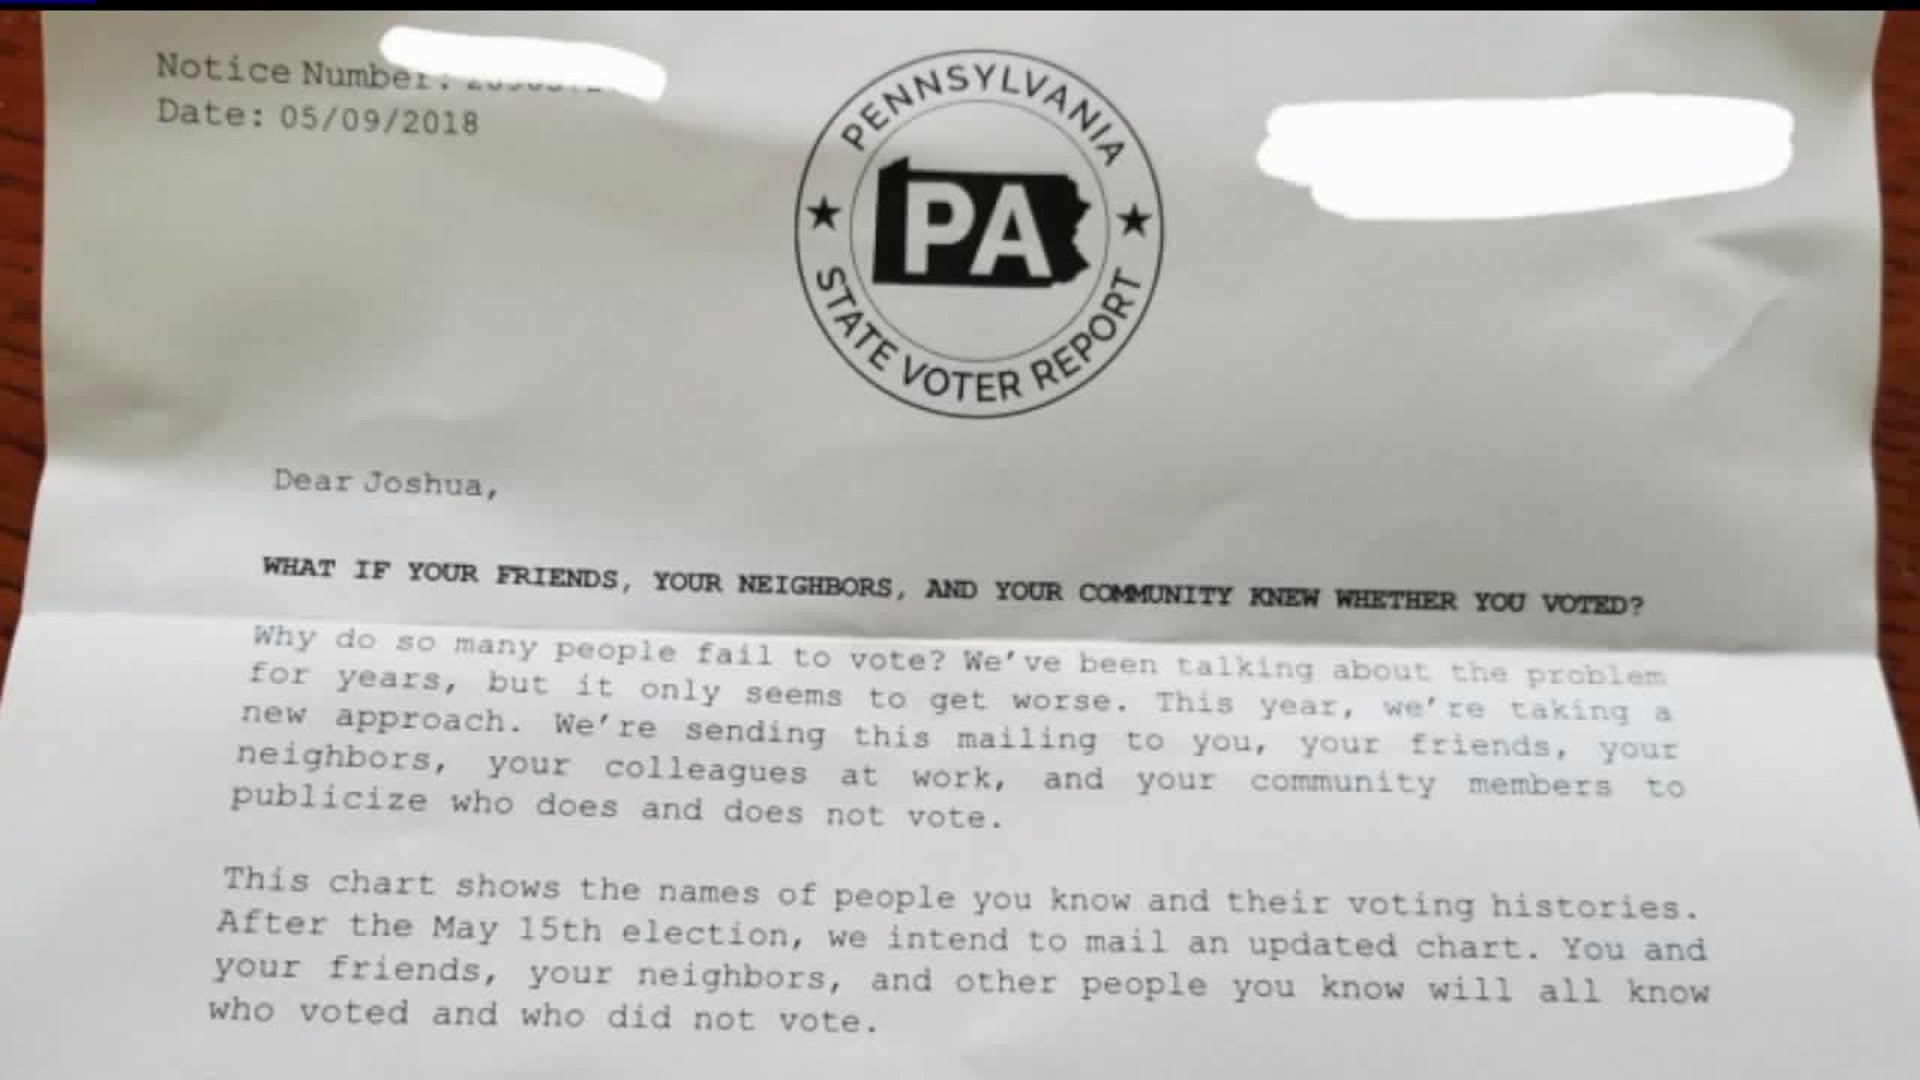 Letter promises to expose those who do not vote